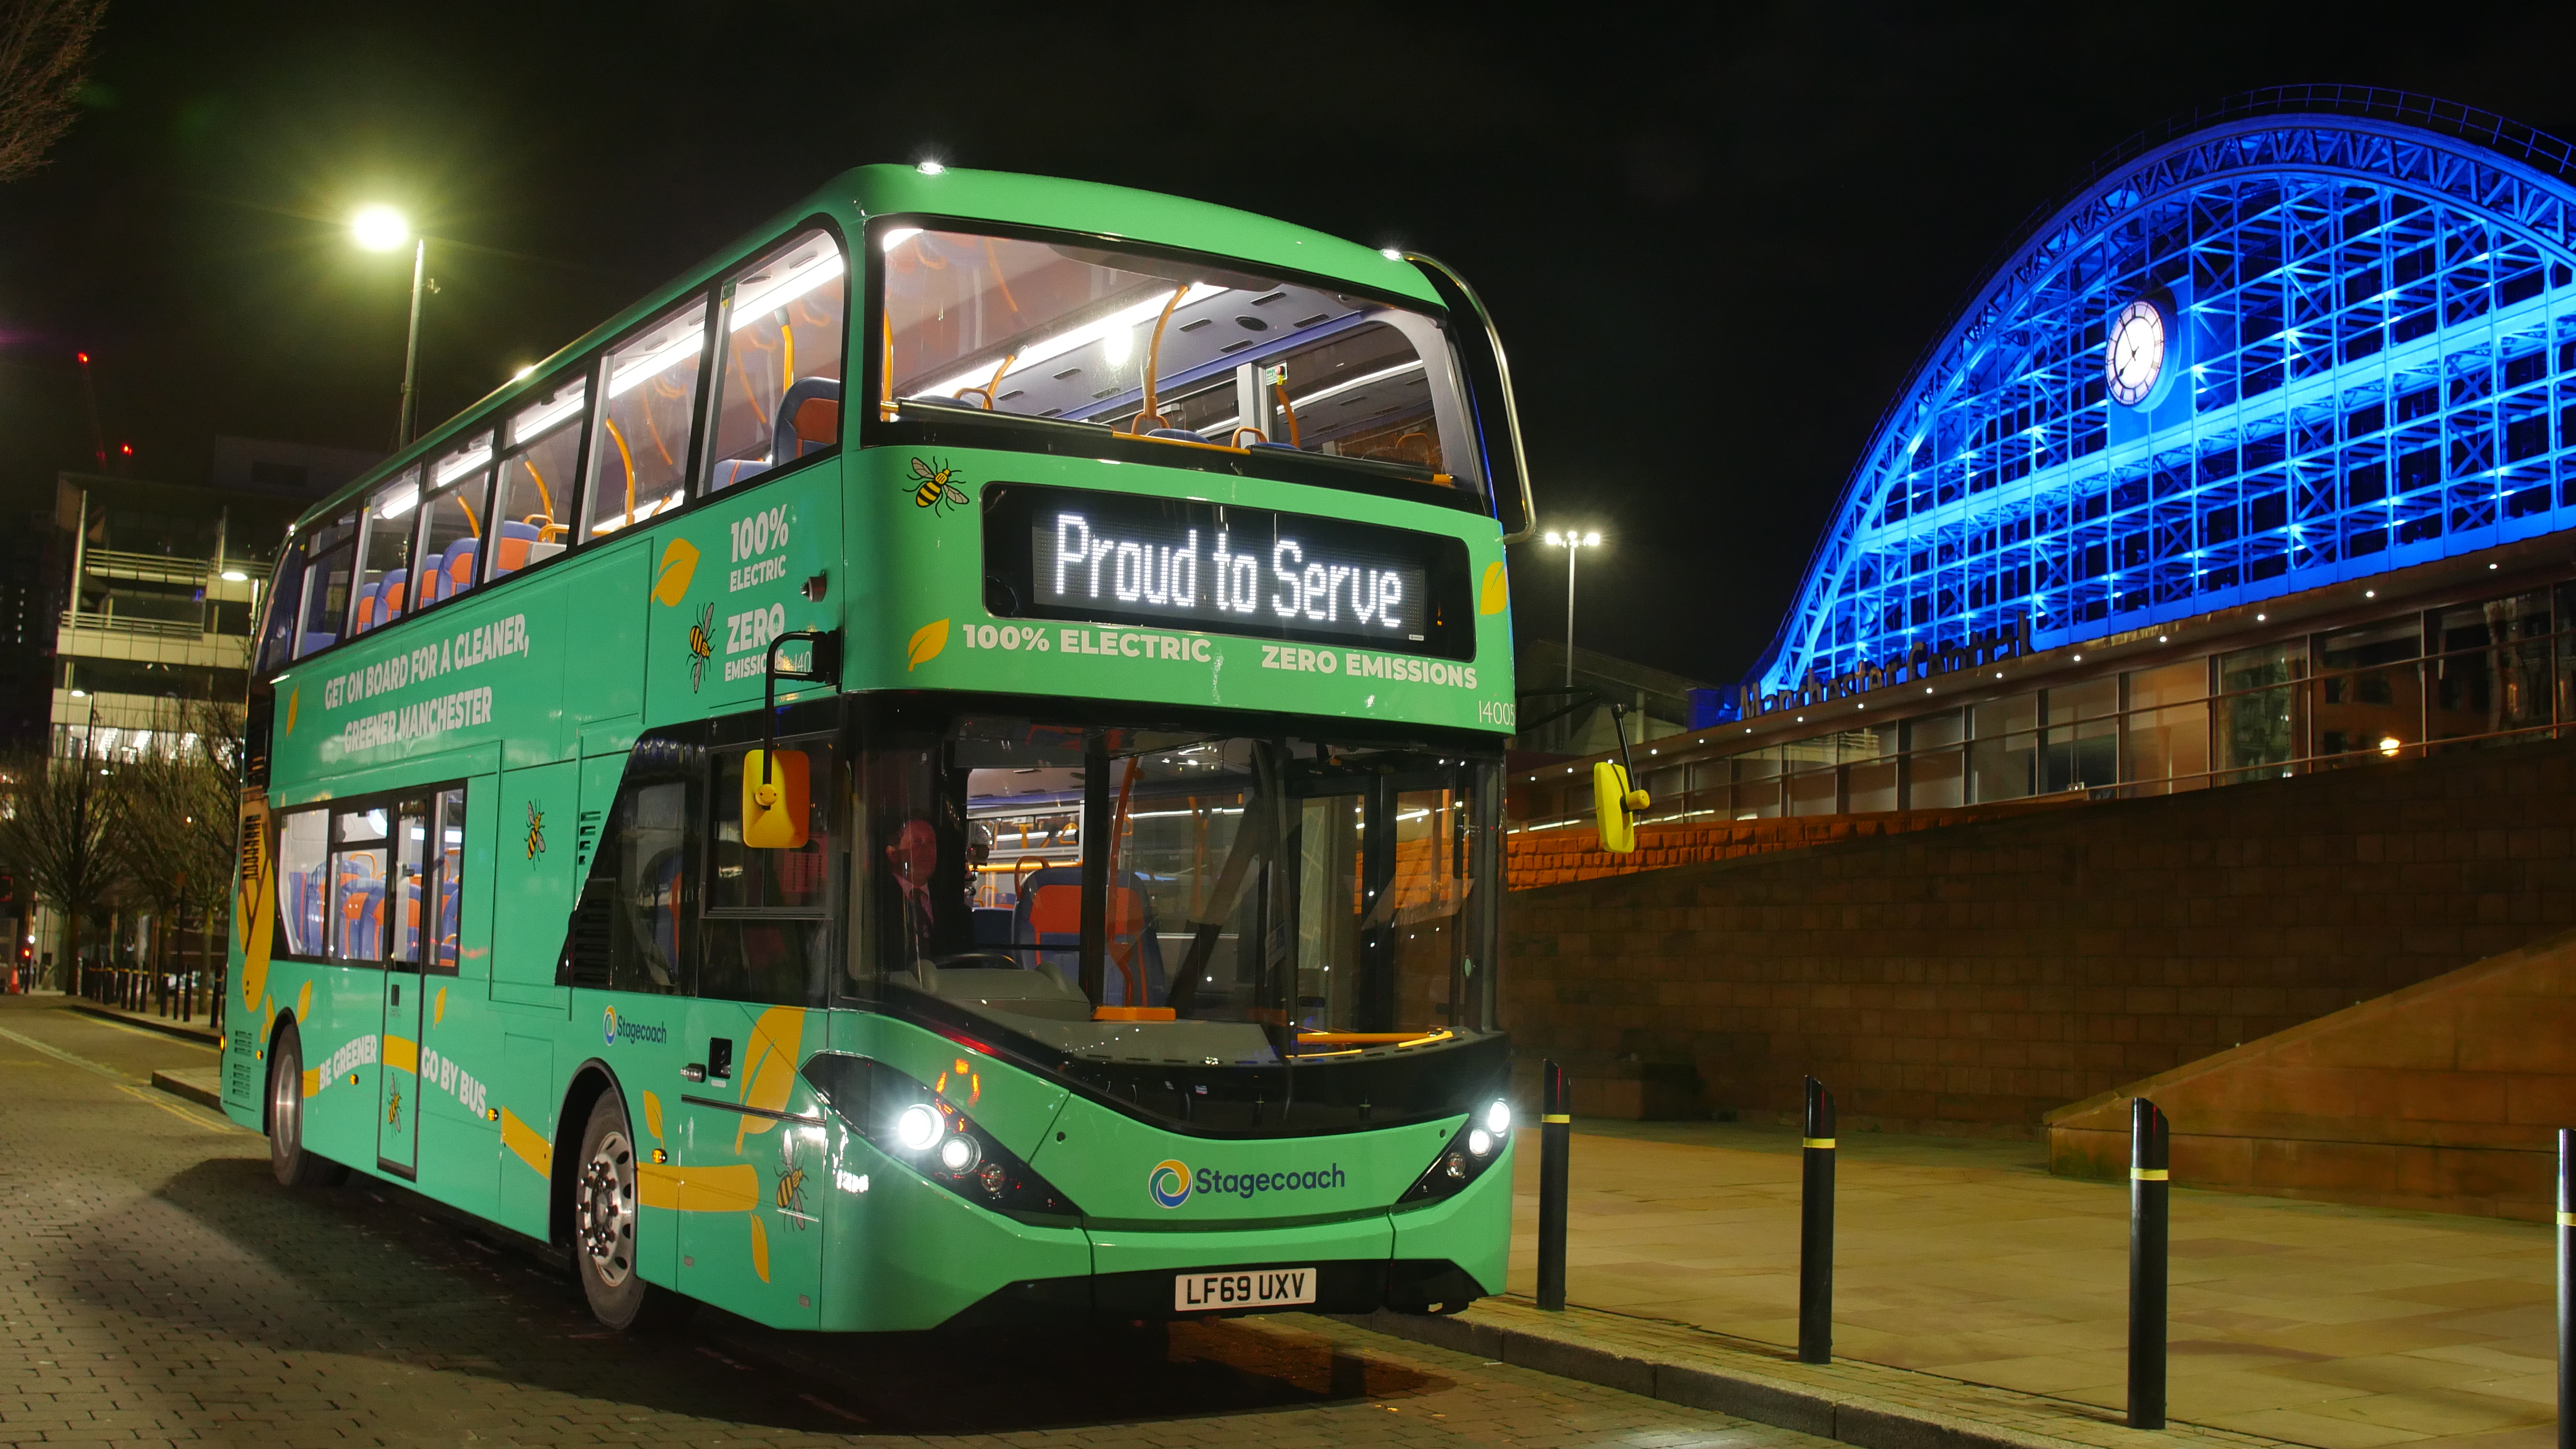 Million more passengers potential with green buses, says Stagecoach